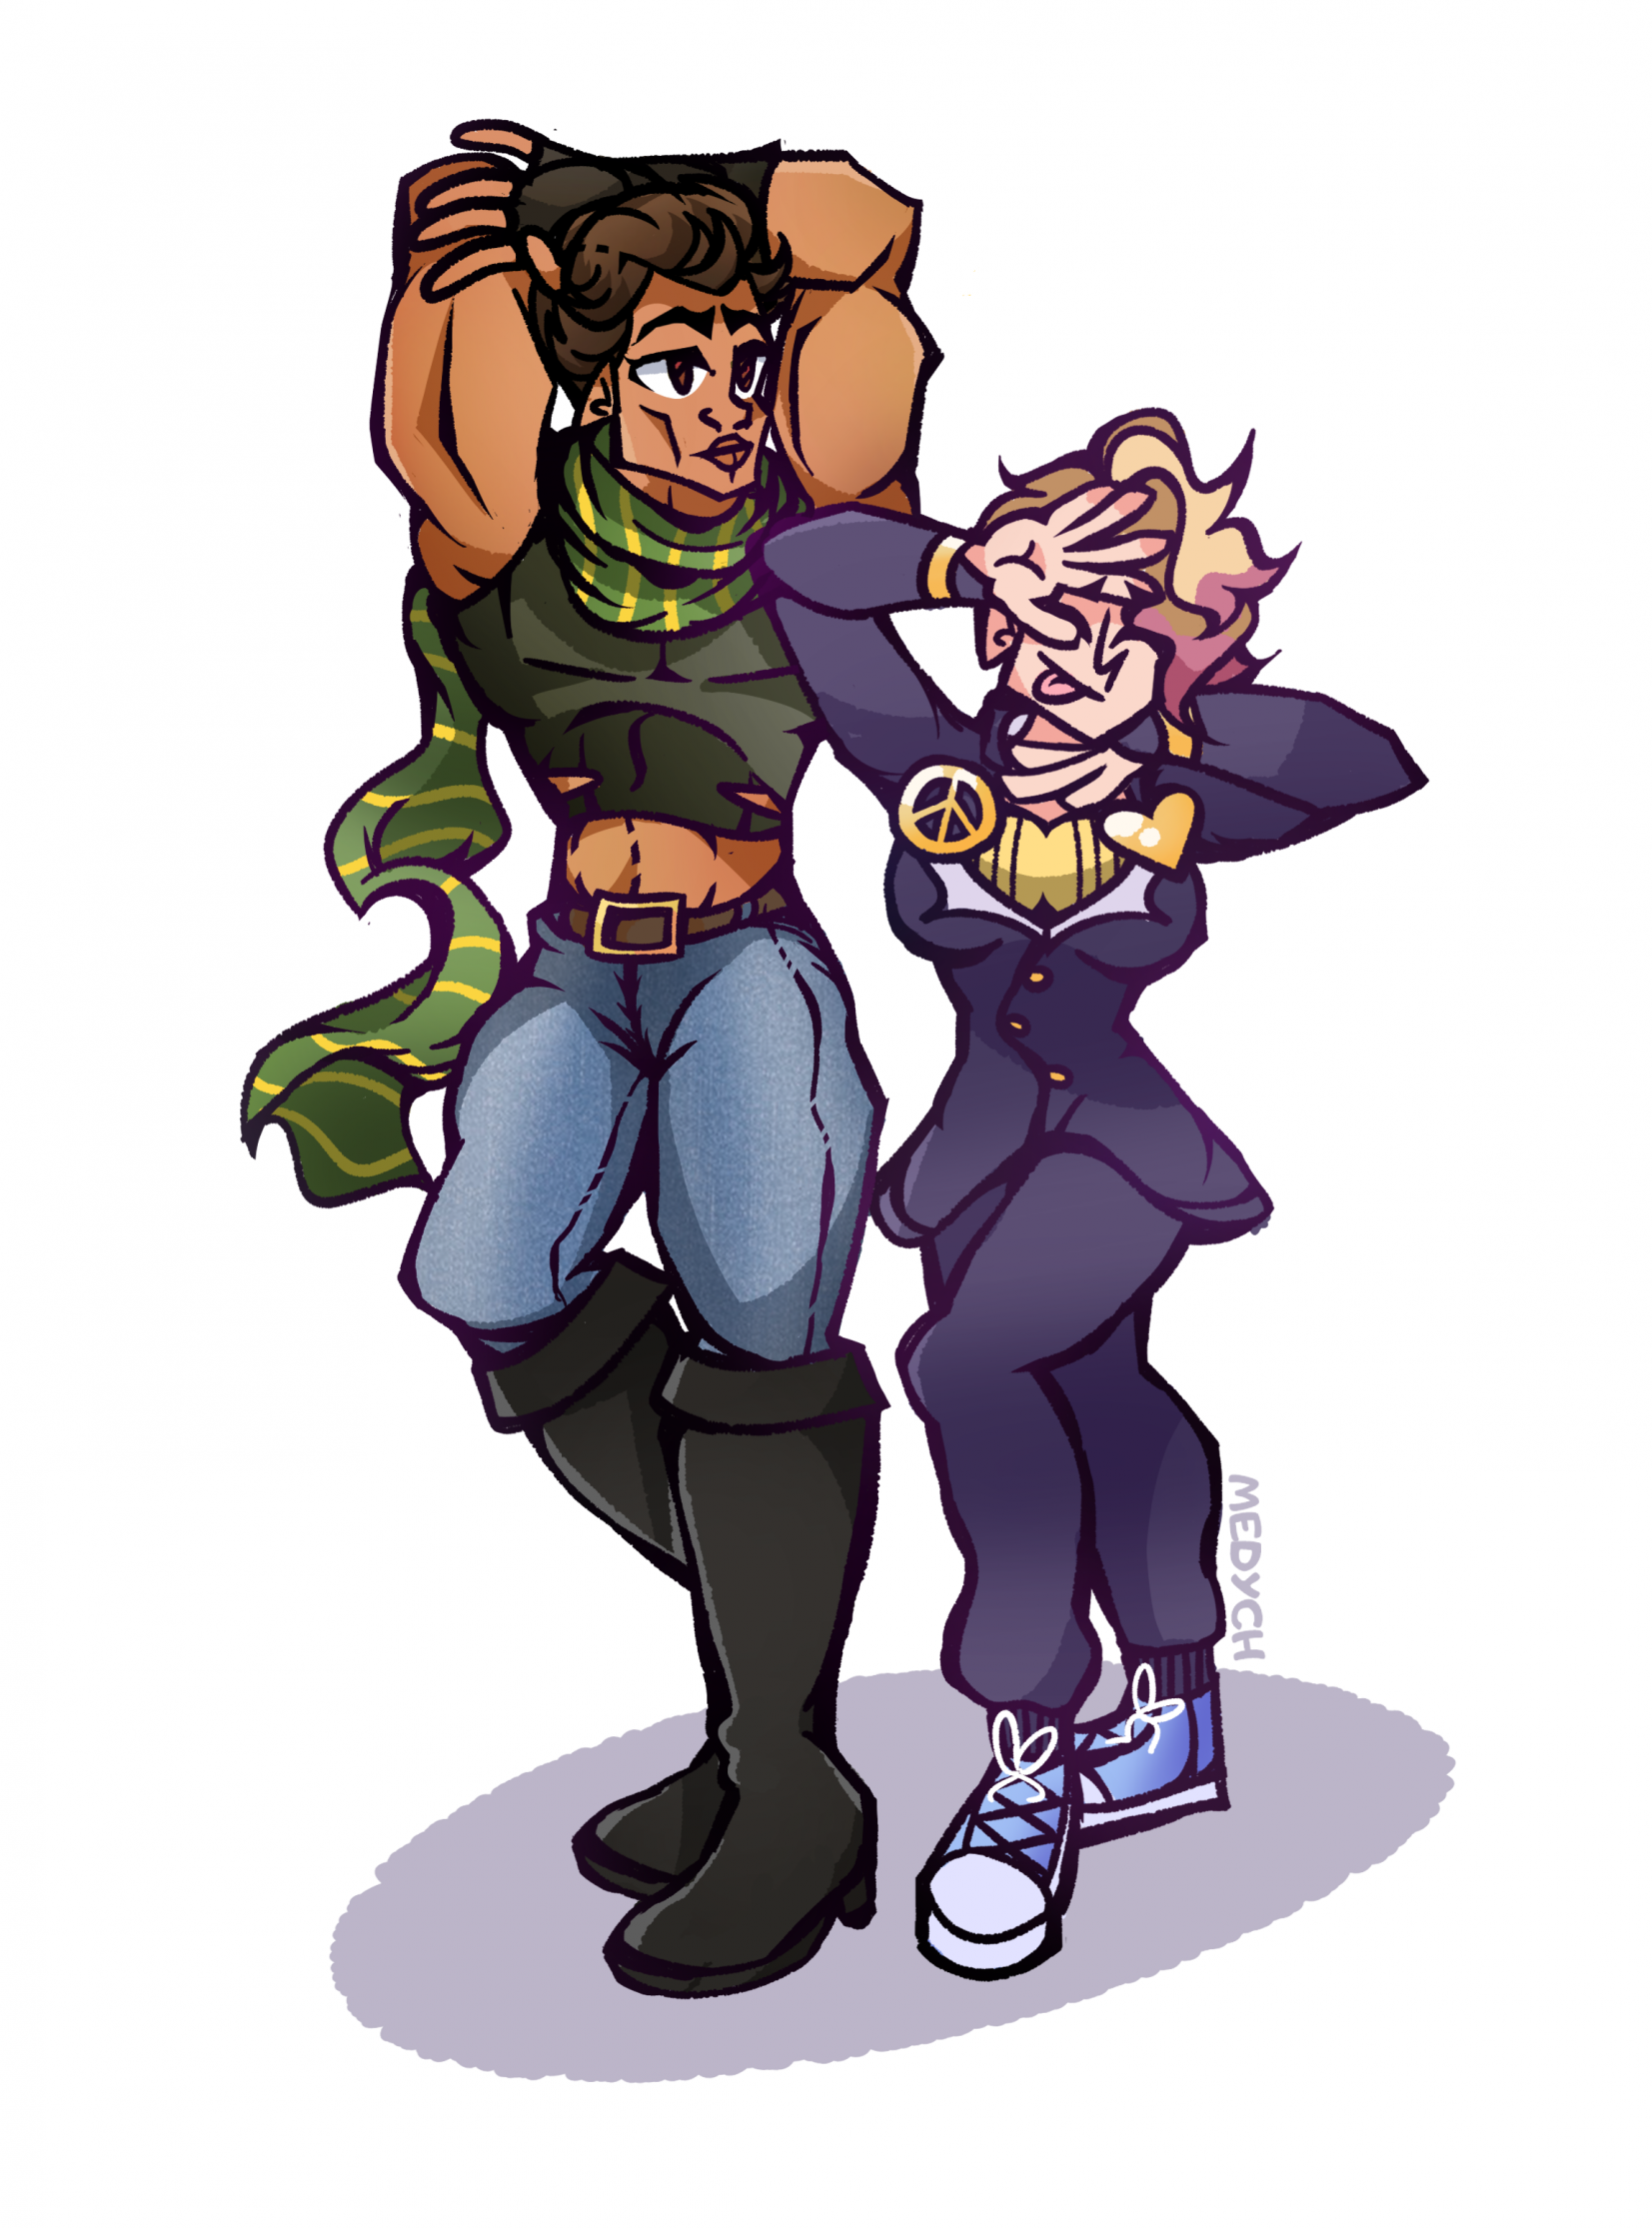 Gwen and Miguel in JoJo poses by Medych -- Fur Affinity [dot] net